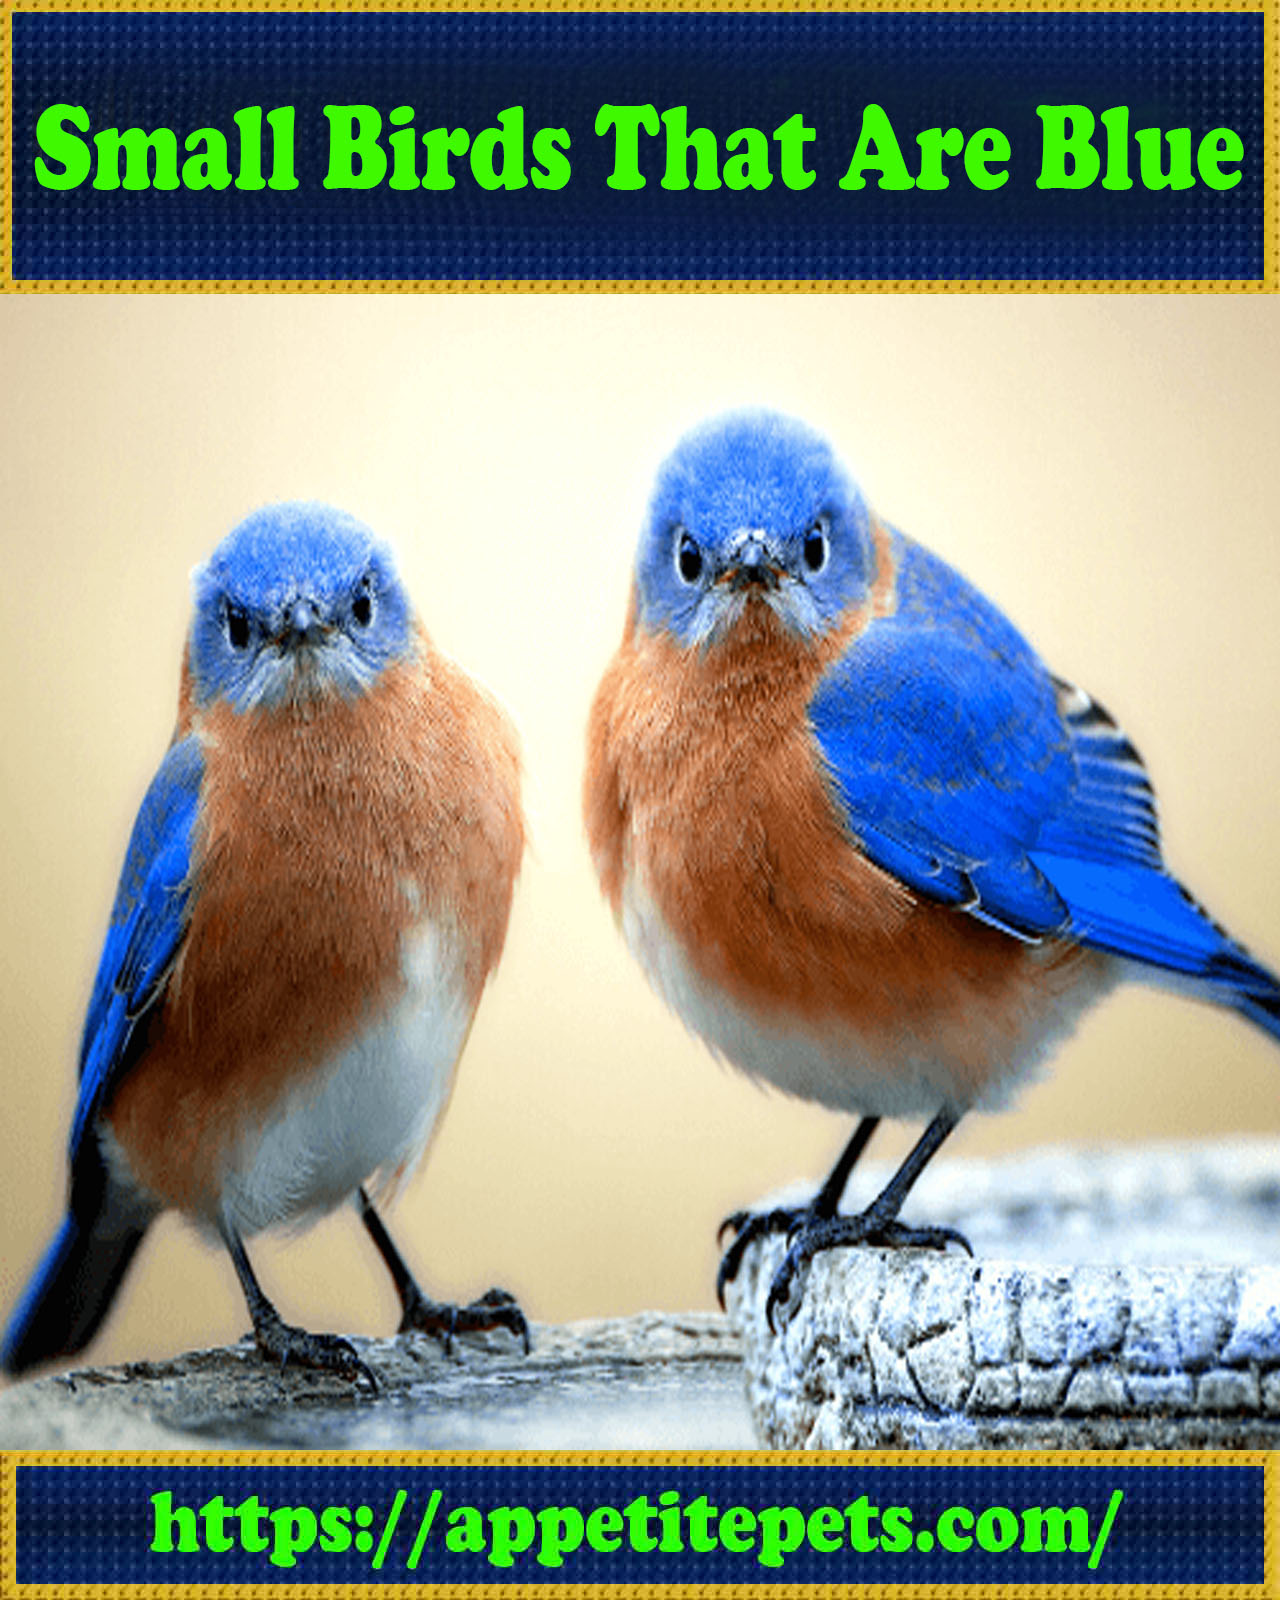 Small Birds That Are Blue